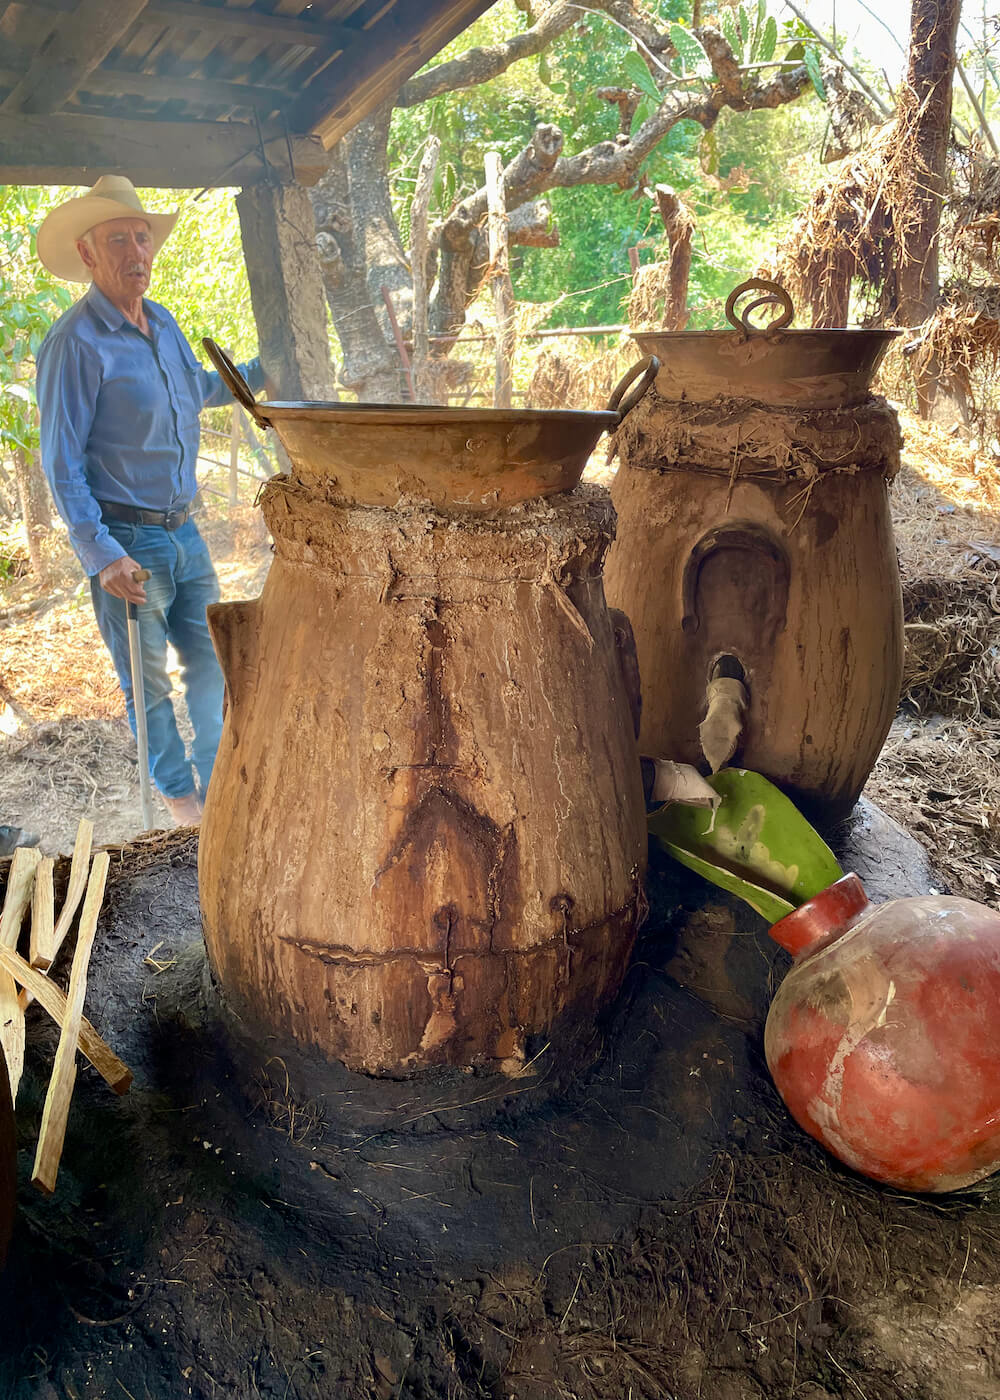 Don Luis stands behind two clay pot stills